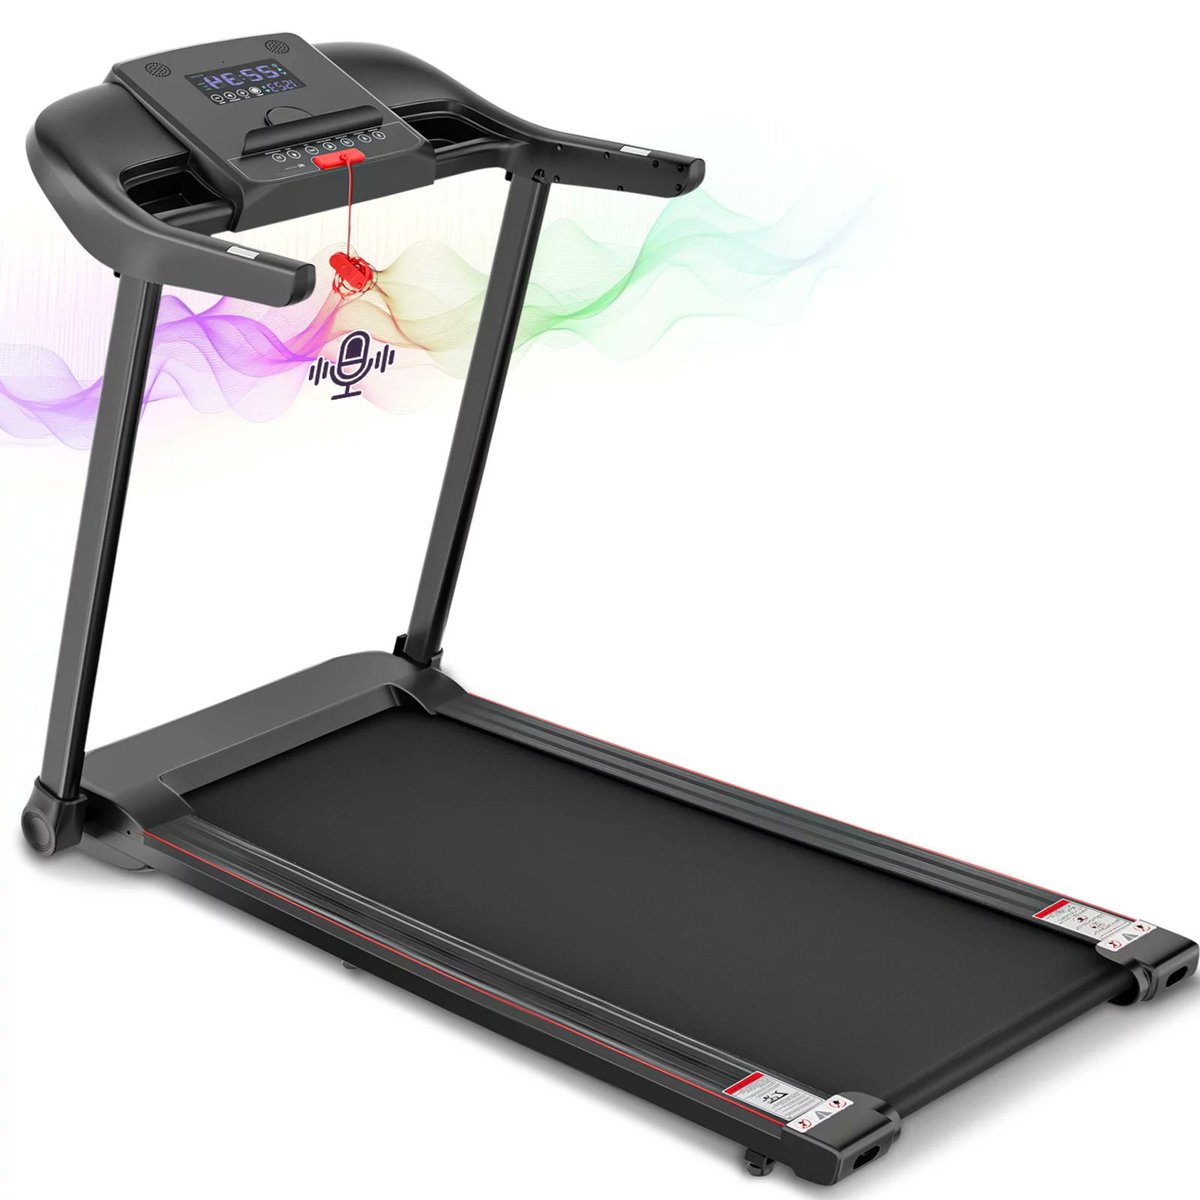 Treadmill with Folding Electric Treadmill Bluetooth Voice Control Exercise Treadmill -- Save $360 -- JUST $239.99 goto.walmart.com/c/2522200/5657… #electrictreadmill #treadmill #treadmills #treadmilldeals #treadmilldeal #electrictreadmills #foldingtreadmill #foldingtreadmills #deals